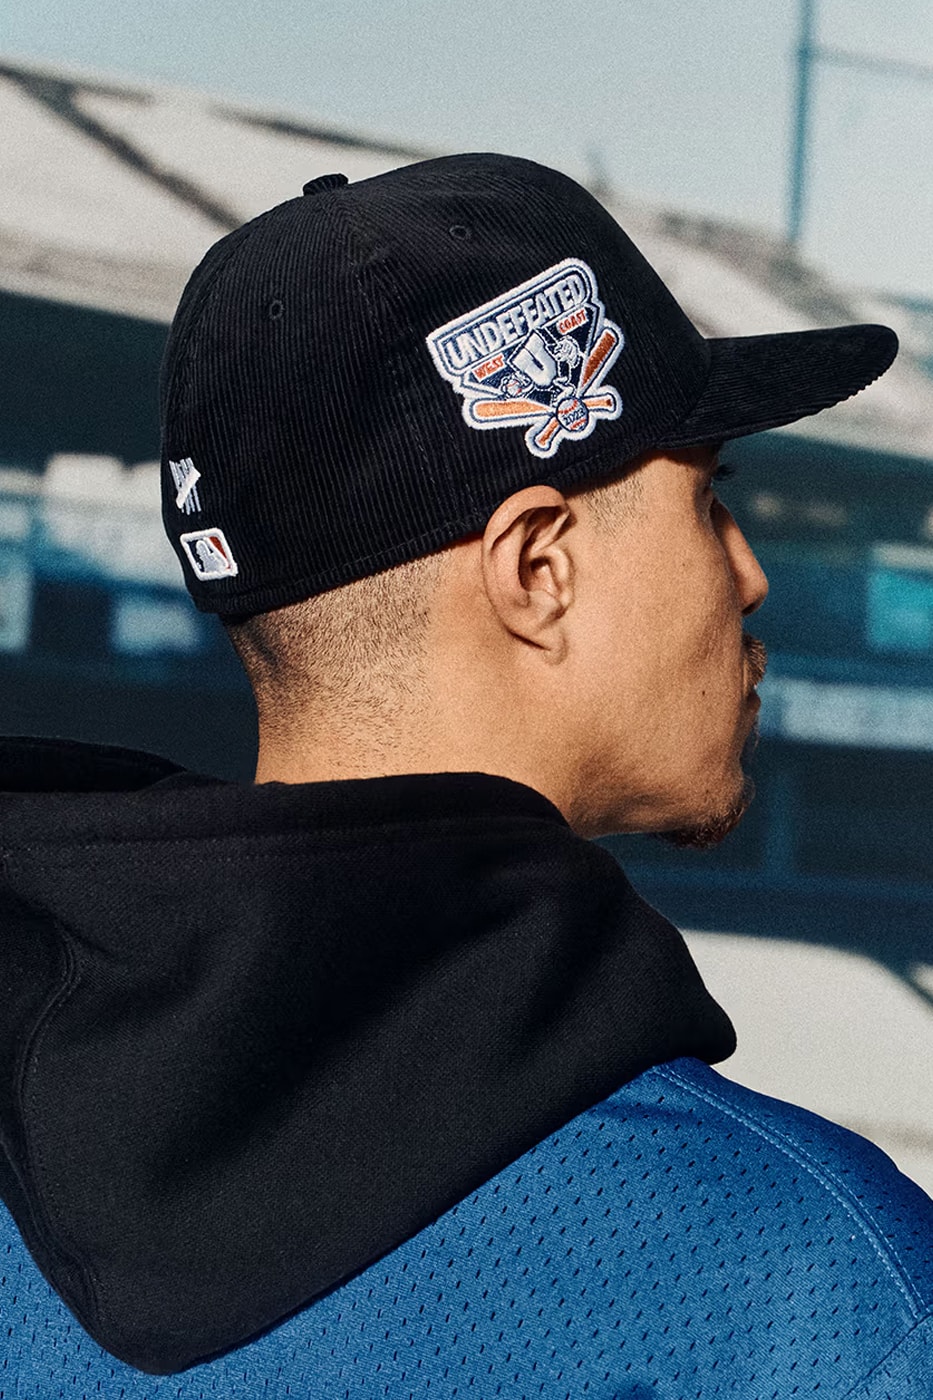 UNDEFEATED x Los Angeles Dodgers Come Together for a New Era 59FIFTY Collaborative Capsule collab collaboration baseball hats mlb major league baseball cap corduroy